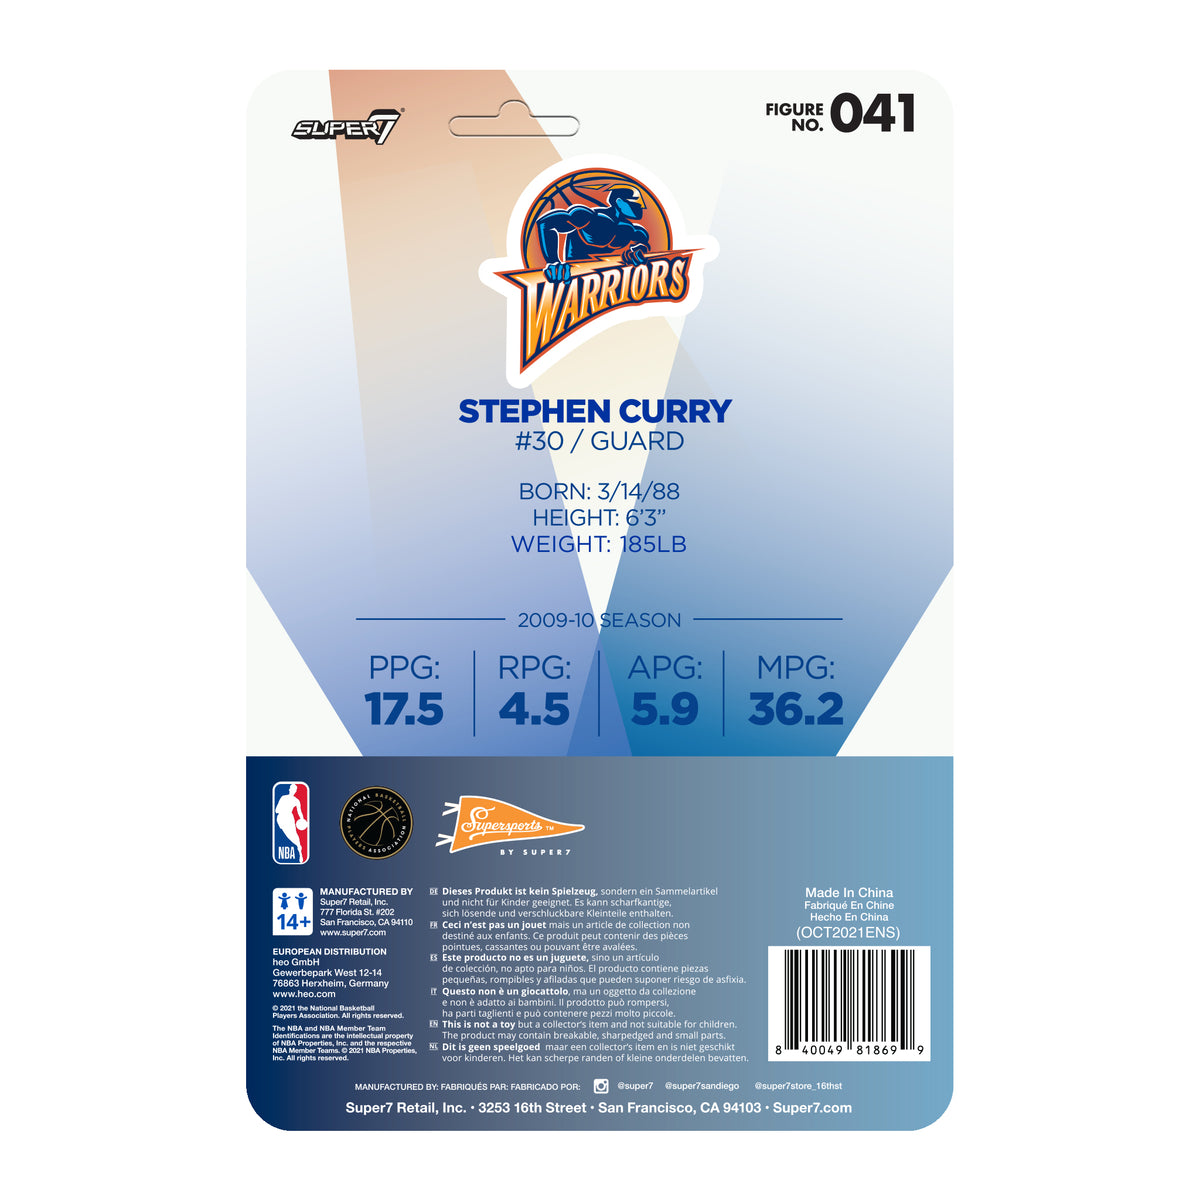 Super7 ReAction NBA Supersports Steph Curry (Golden State Warriors) Figure